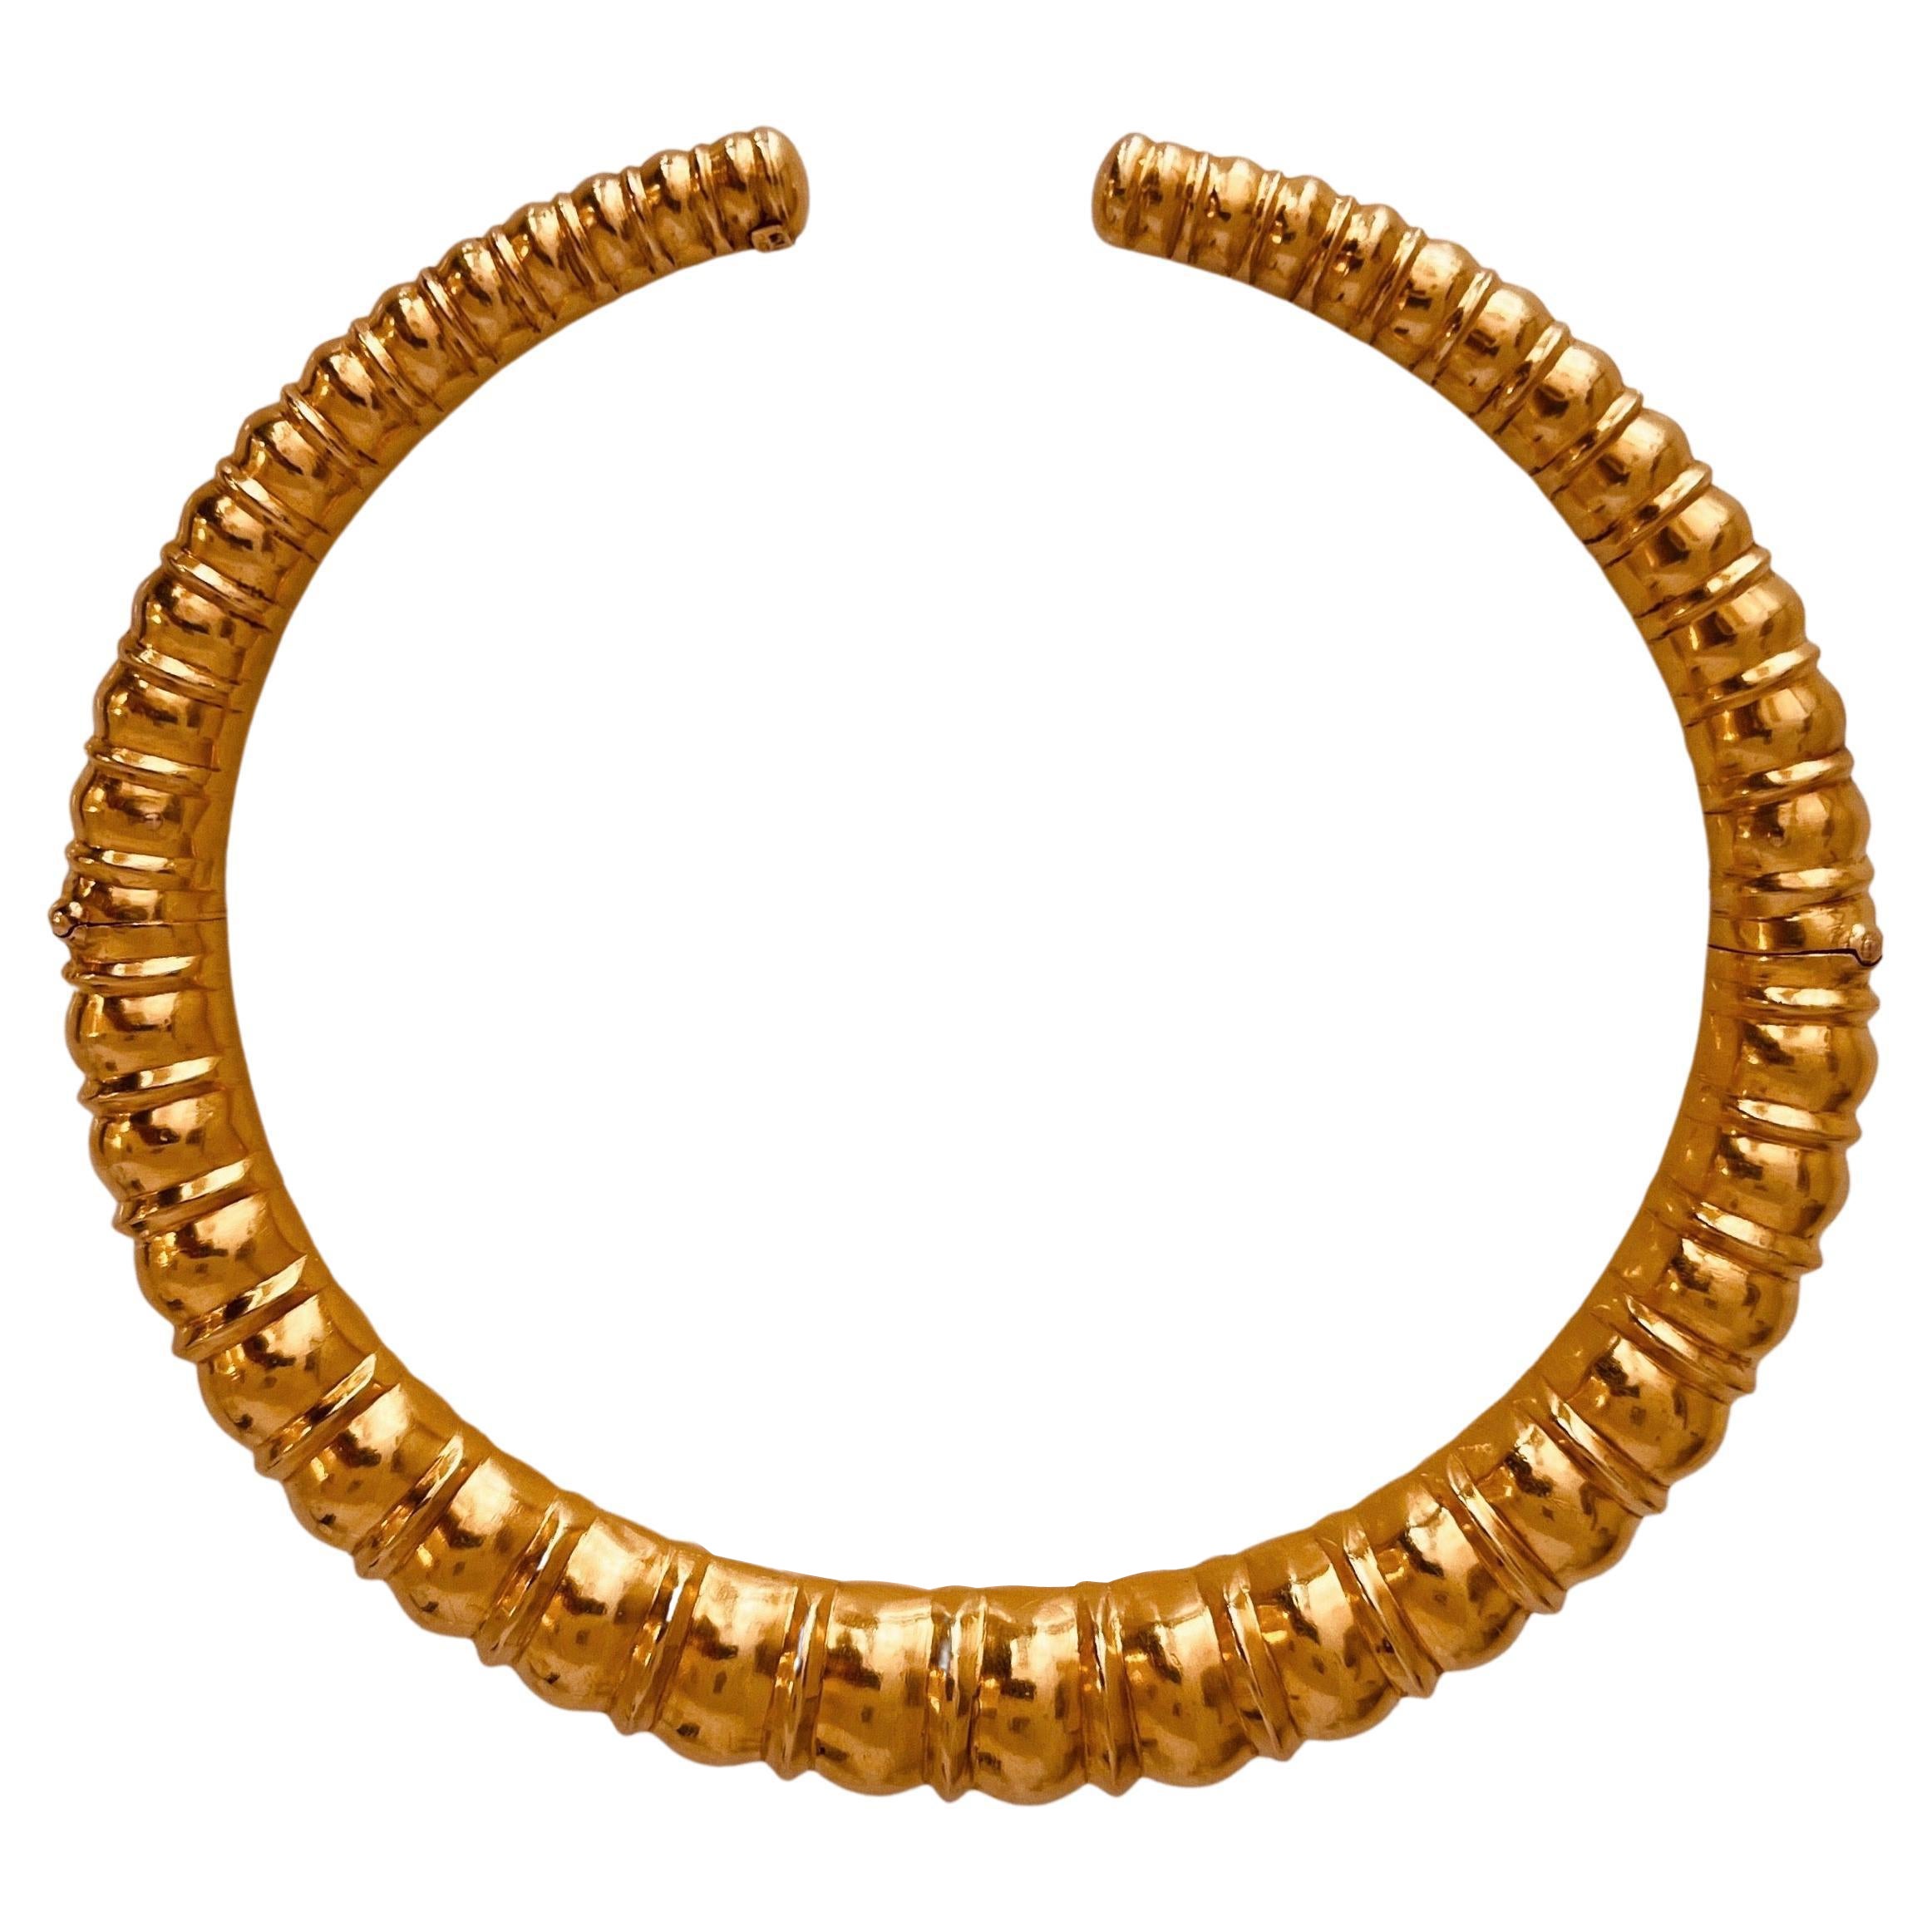 A high carat gold torque of graduated rounded rib design inspired from the Mycenaean period. 20-22 carat gold choker necklace. 34 cm internal circumference. Weight: 102.2grams. Circa 1970's. Hallmarks: makers mark and signed. Price: 15,750£. Item is